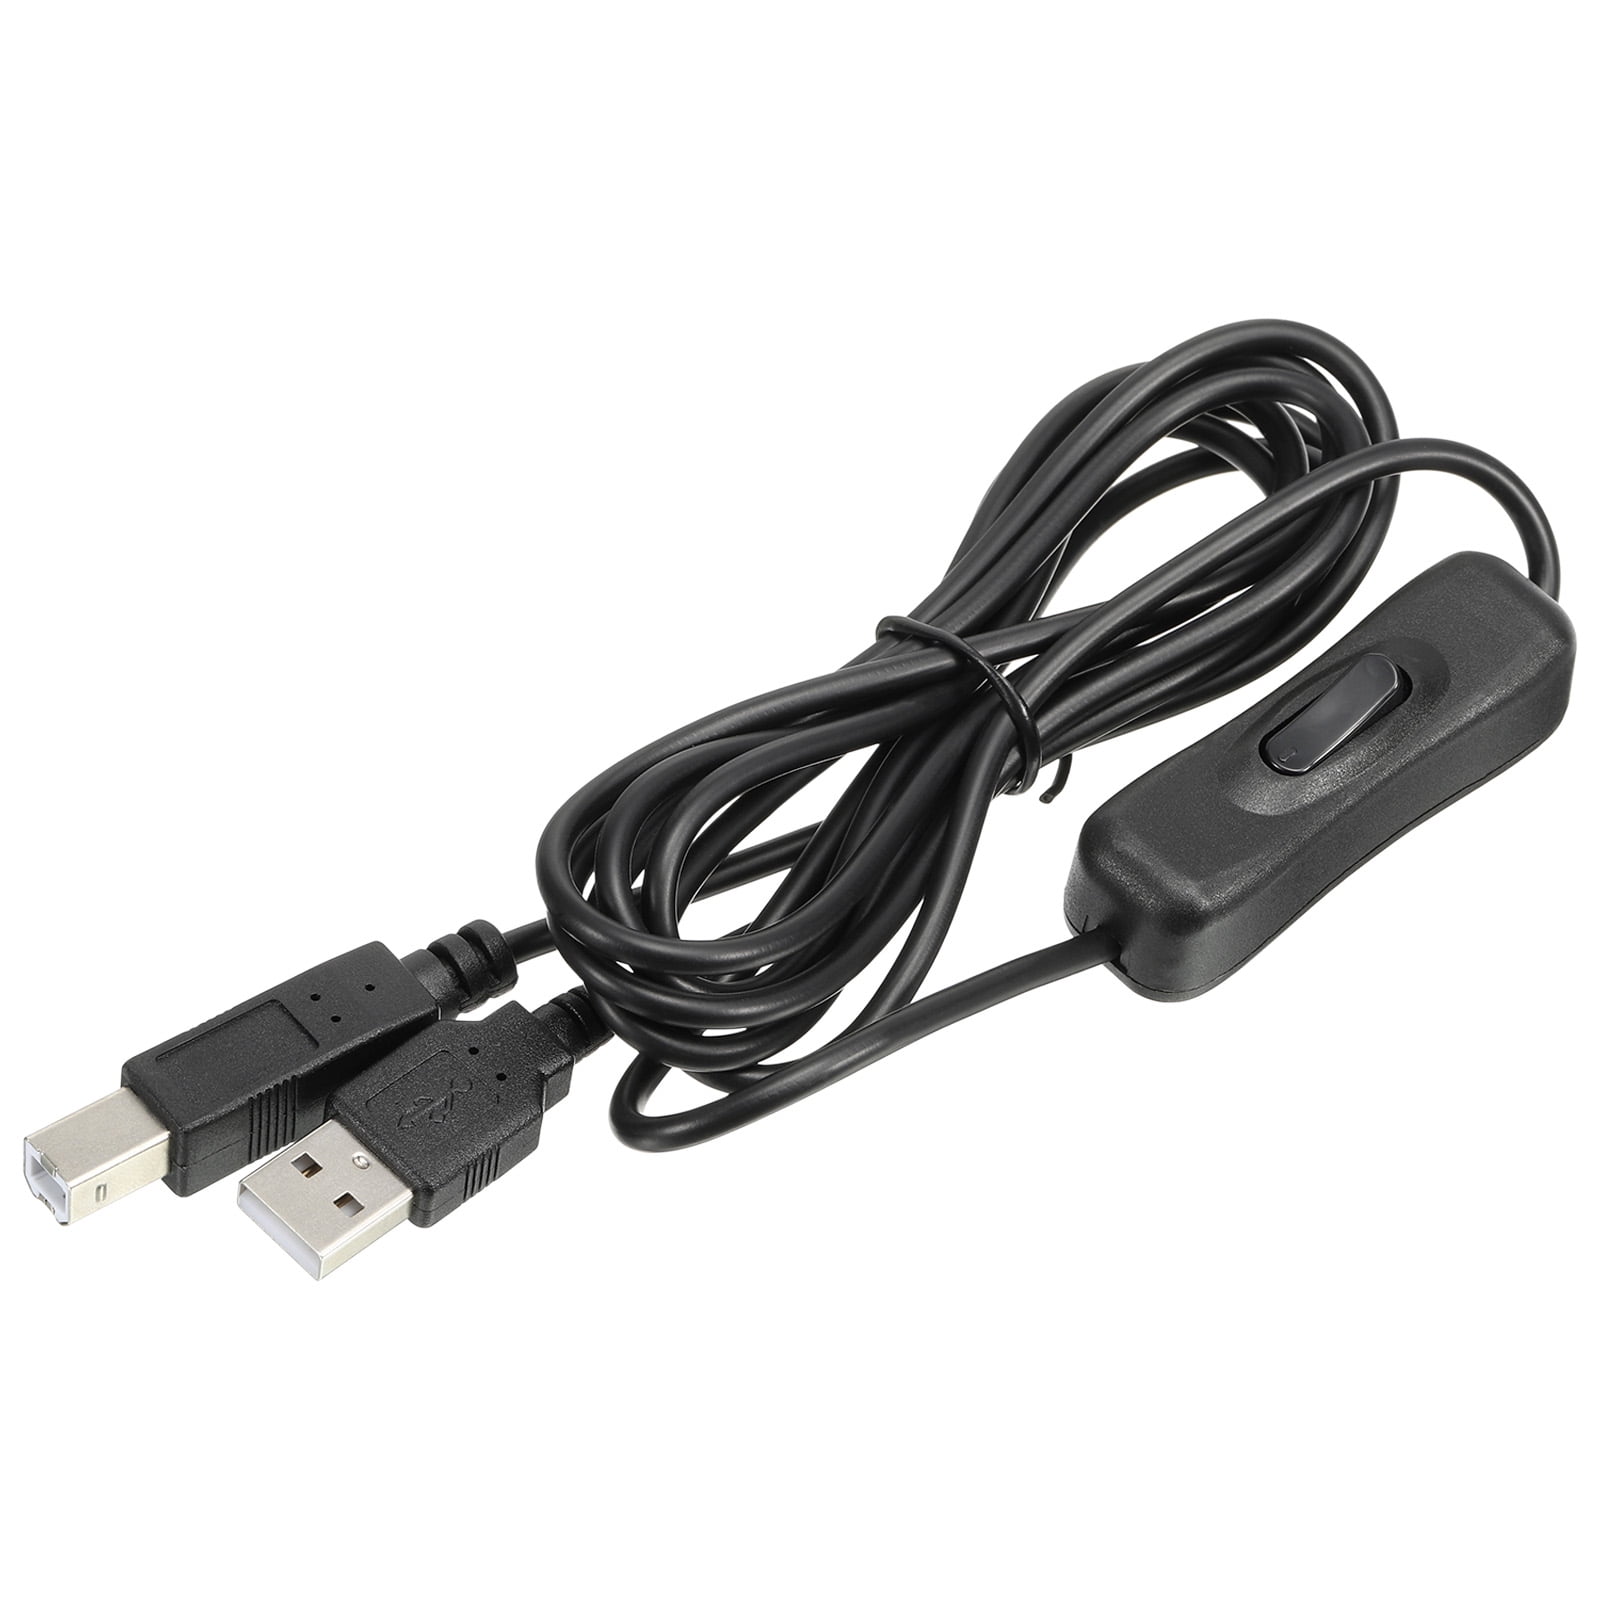 USB-A to USB-B Cable (2 meter)